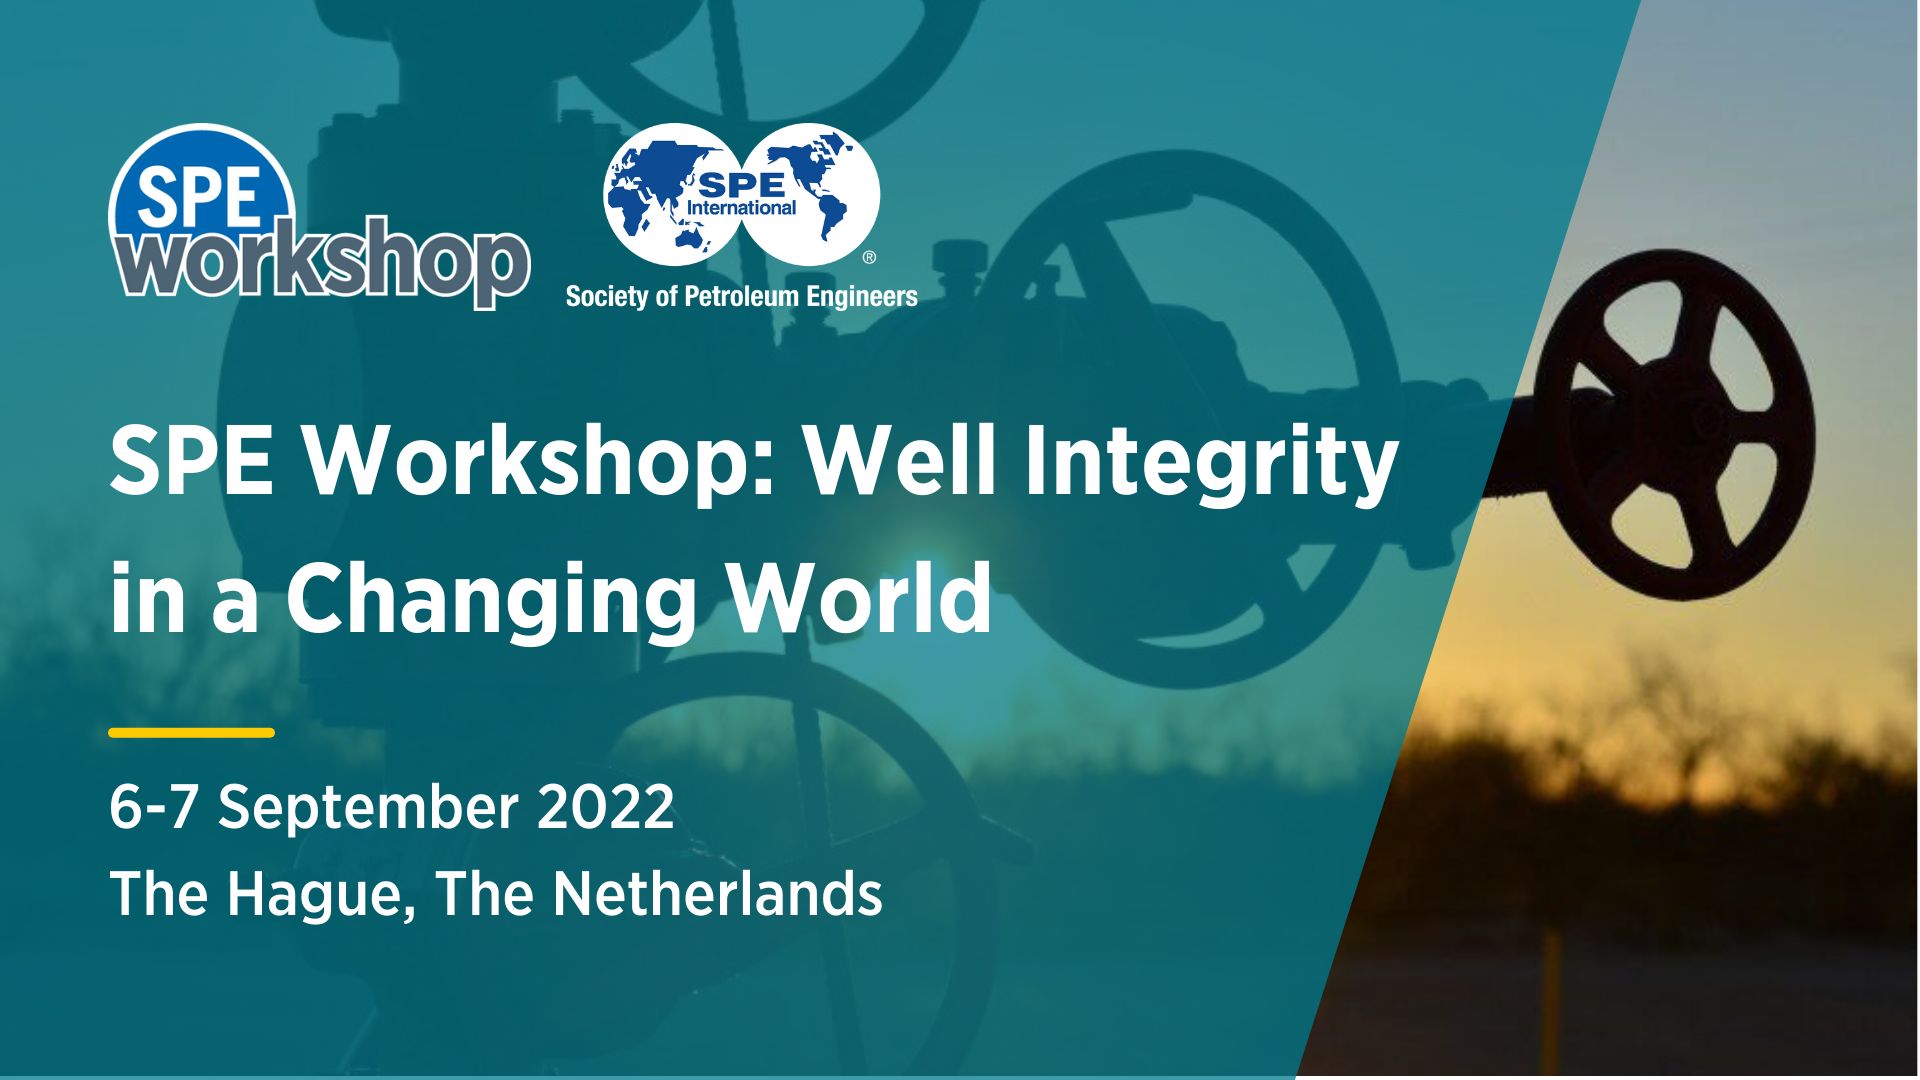 SPE Workshop: Well Integrity in a Changing World, 6-7 September 2022, The Netherlands